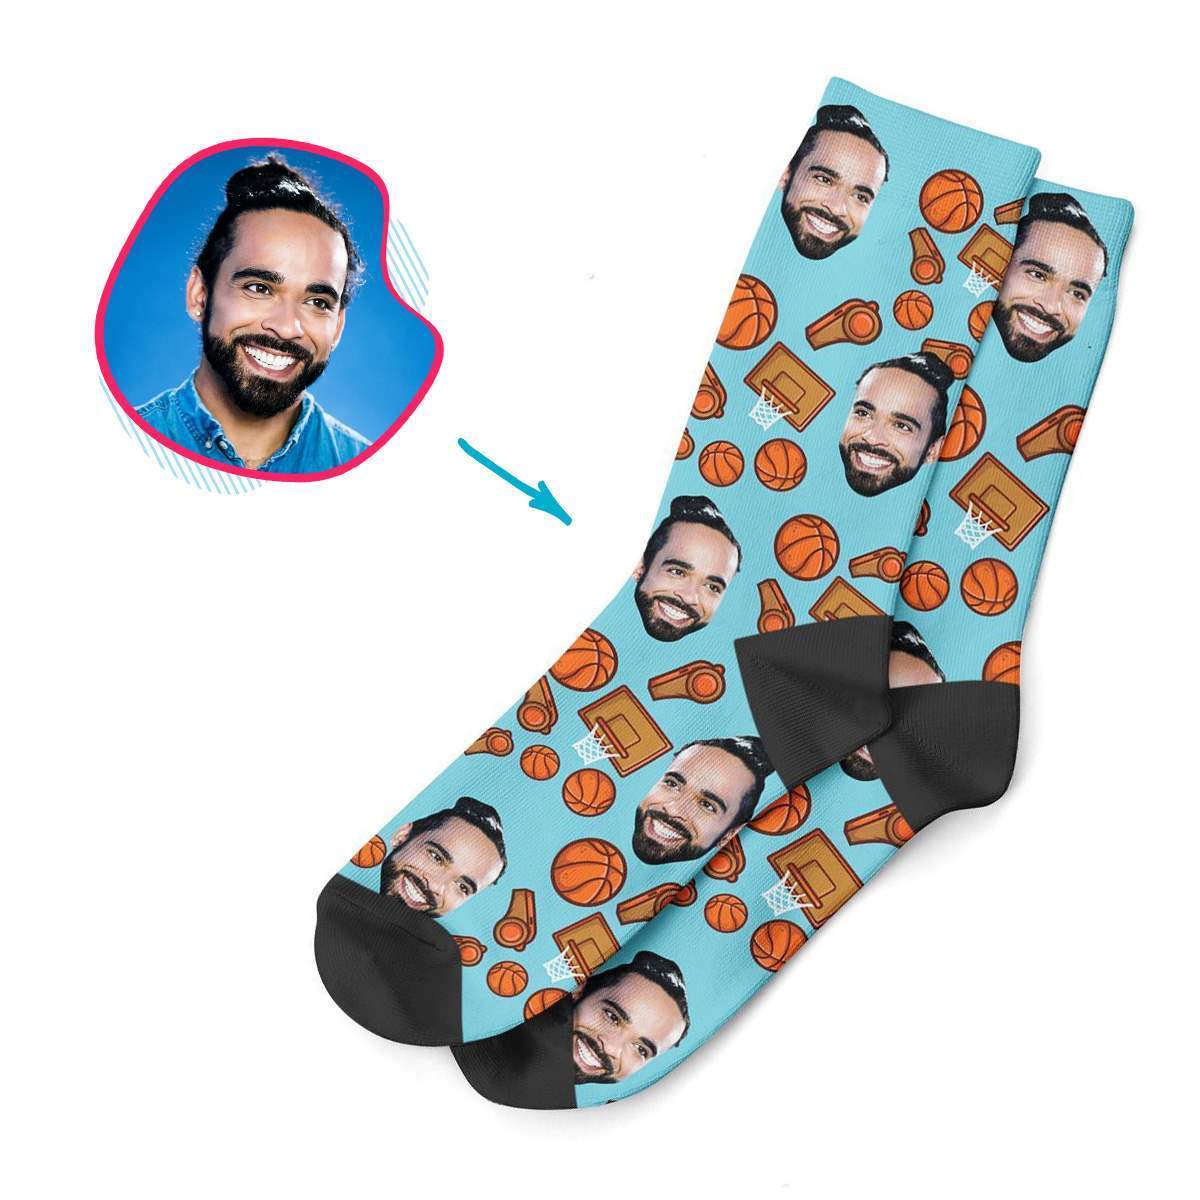 blue Basketball socks personalized with photo of face printed on them